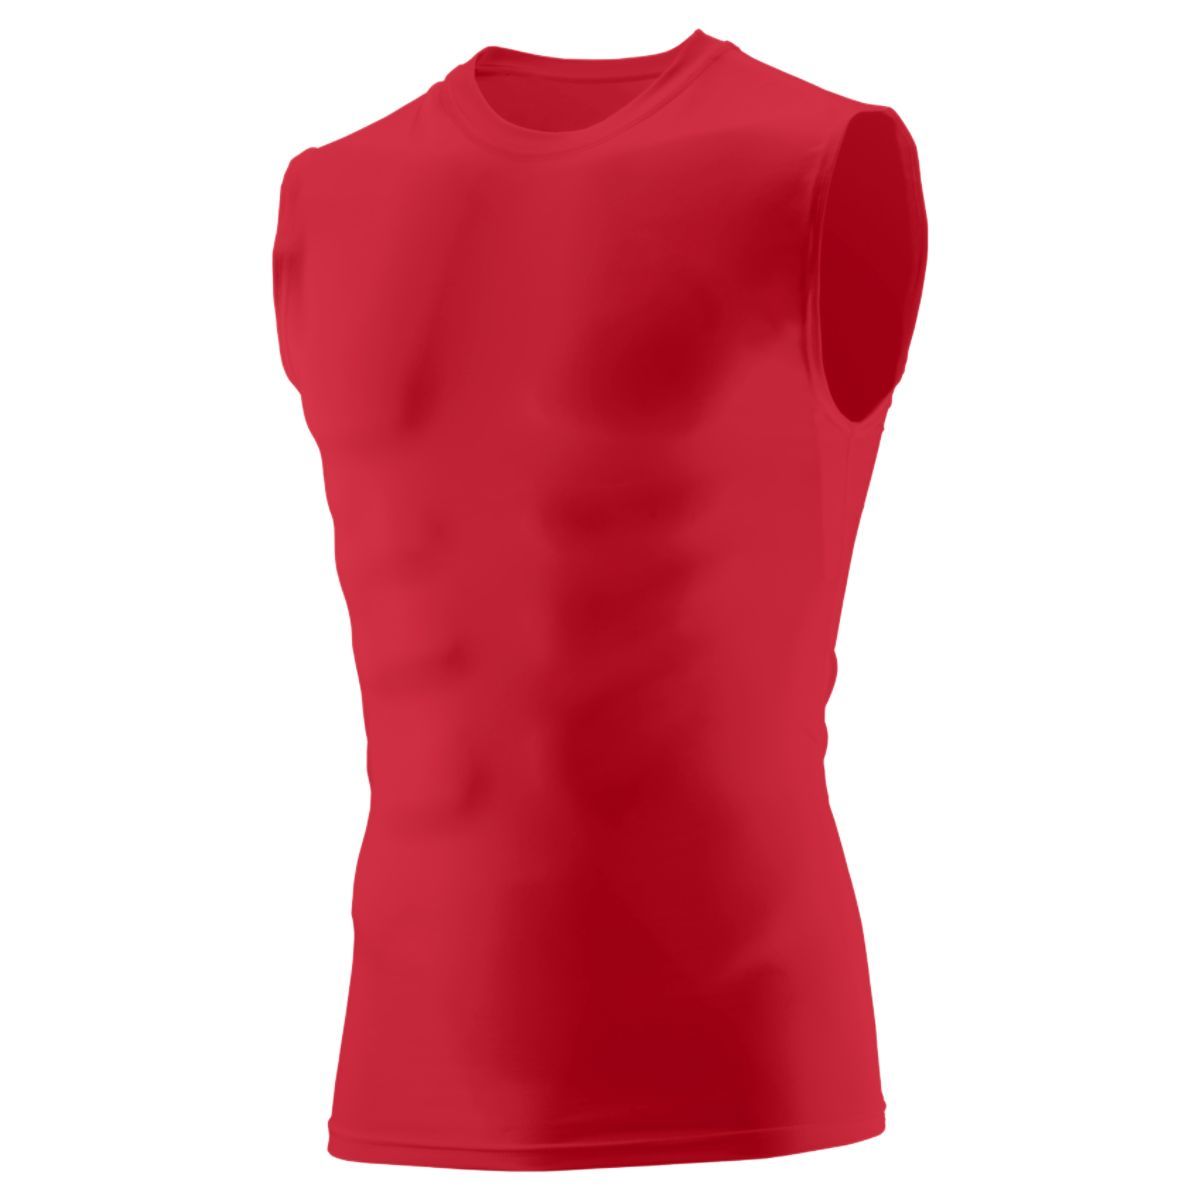 Augusta Sportswear Hyperform Compression Sleeveless Tee in Red  -Part of the Adult, Adult-Tee-Shirt, T-Shirts, Augusta-Products, Shirts product lines at KanaleyCreations.com